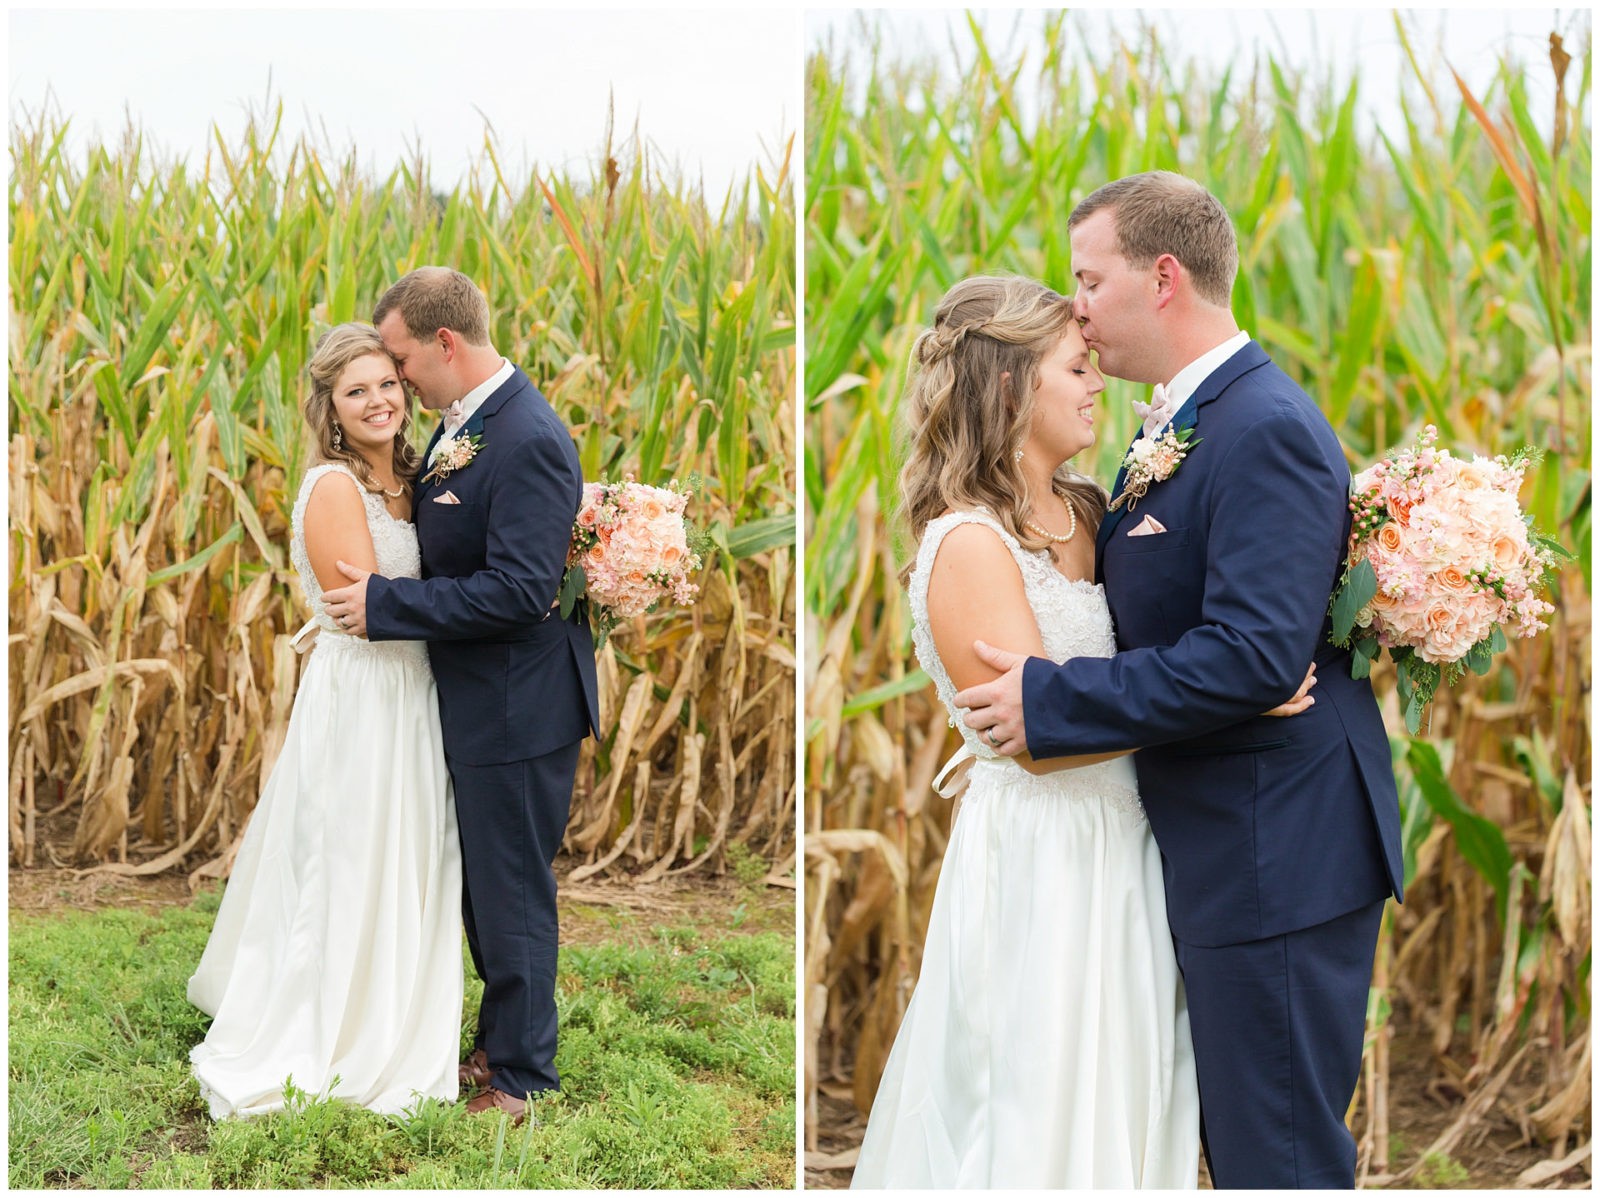 Bride and Groom Wedding Photos at the Barn at McCall Springs in Lawrenceburg, Kentucky.